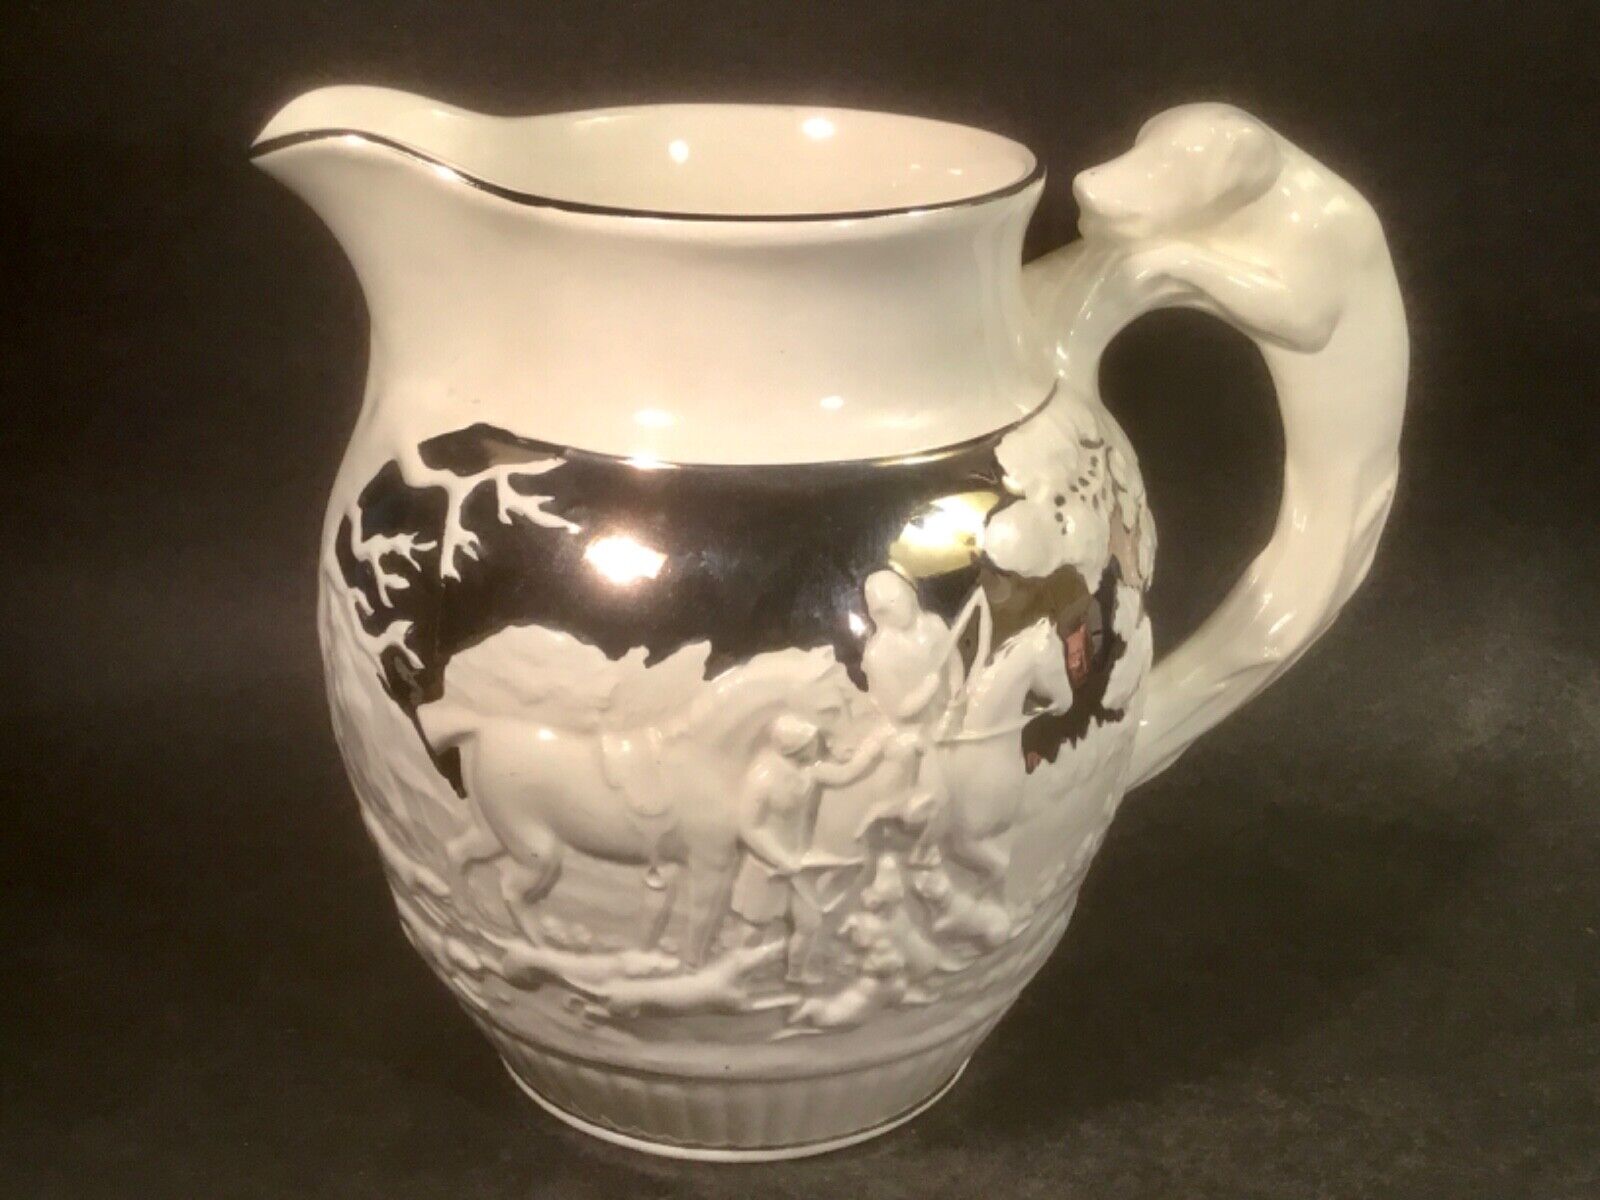 Wedgwood Hunting Pitcher 7.25 inches tall and Hunting Dog Handle